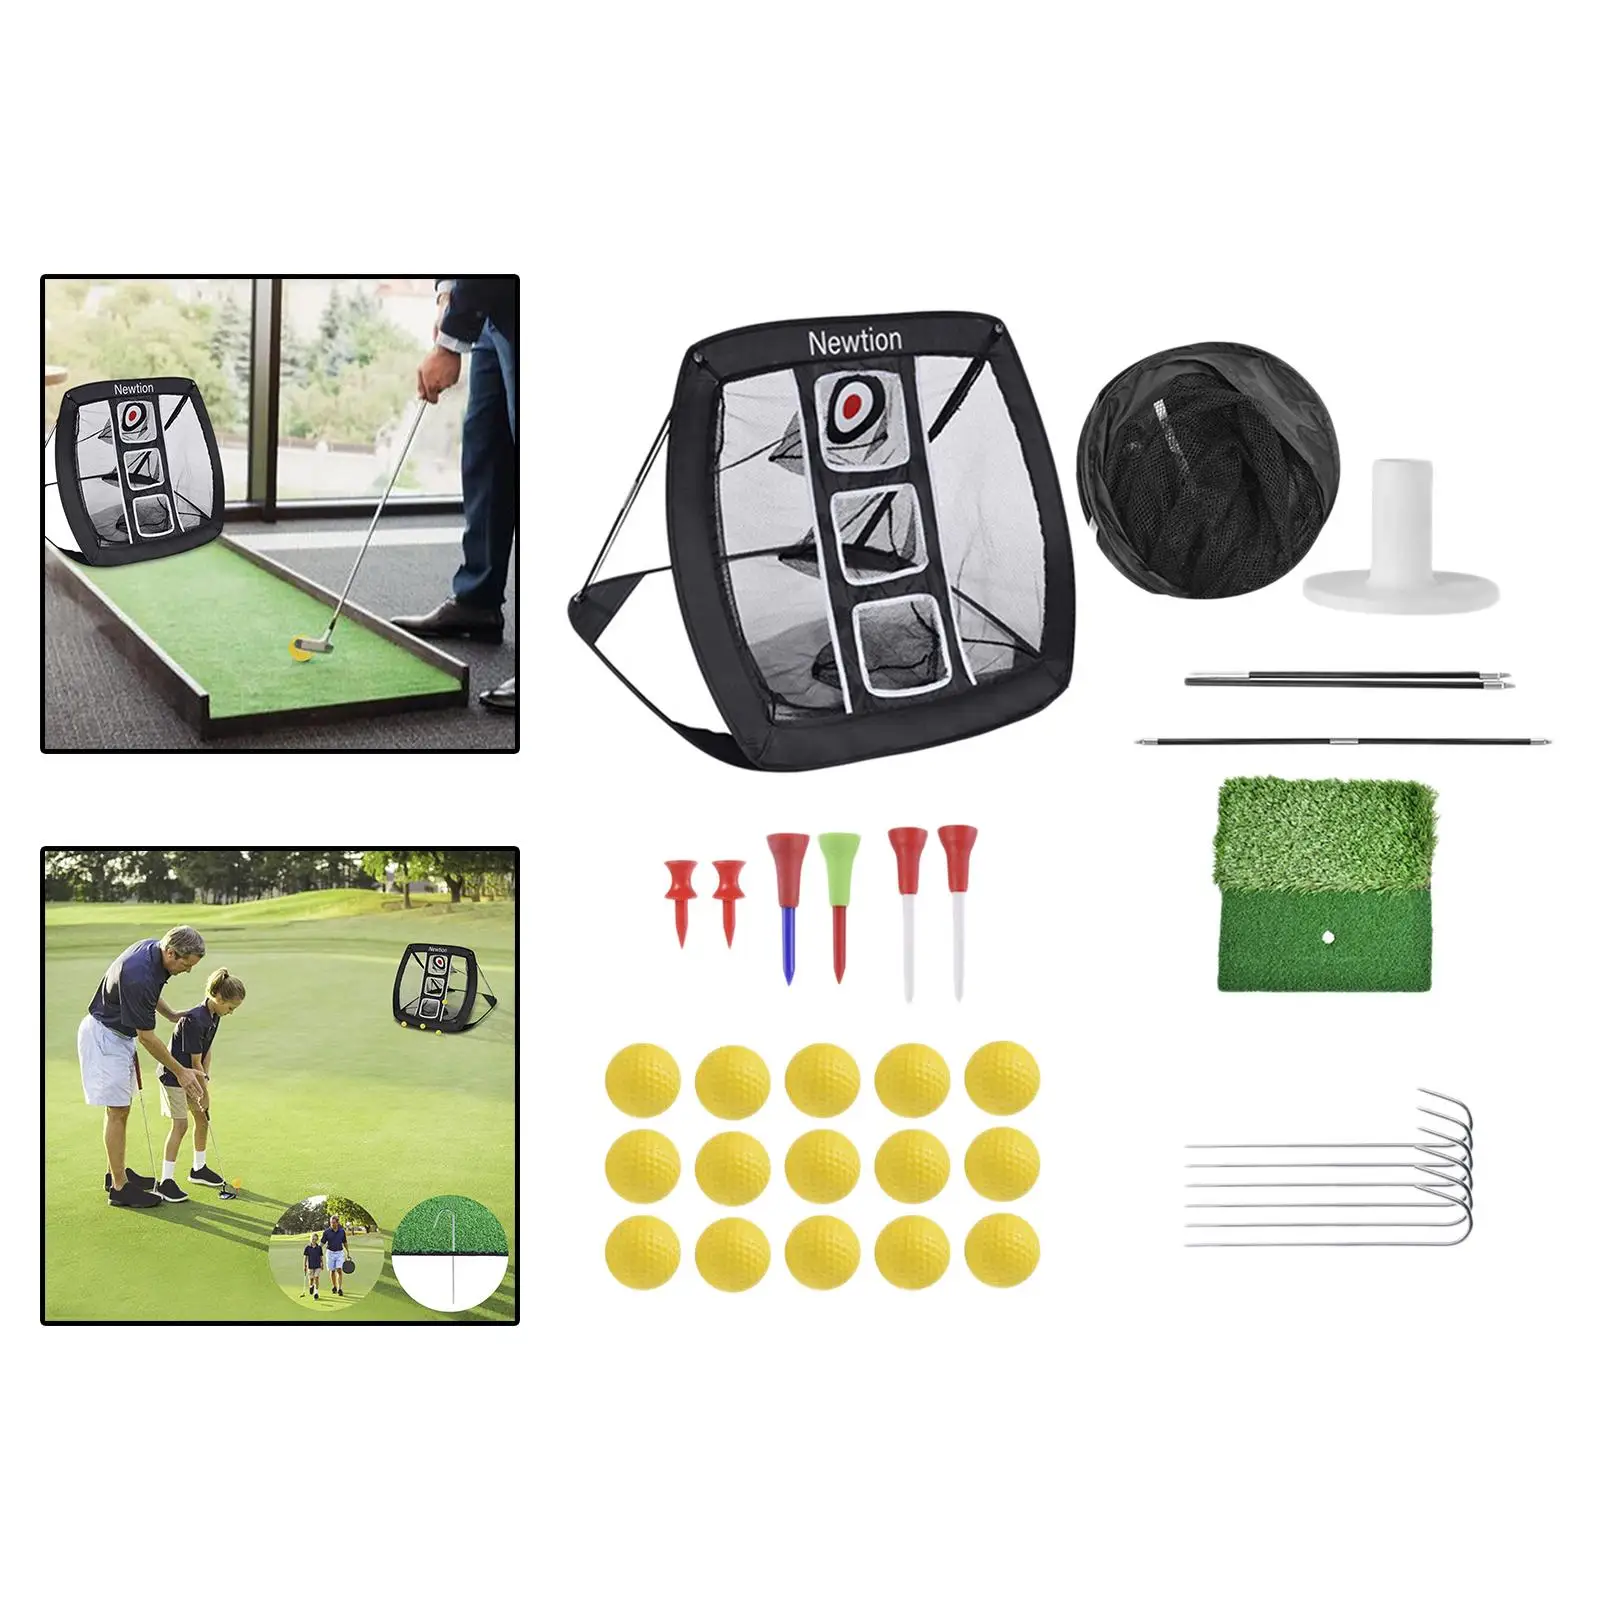 

Golf Chipping Net Outdoor Indoor Golfing Target Backyard Practice Swing Game with Training Balls Hitting Mat Carry Bag